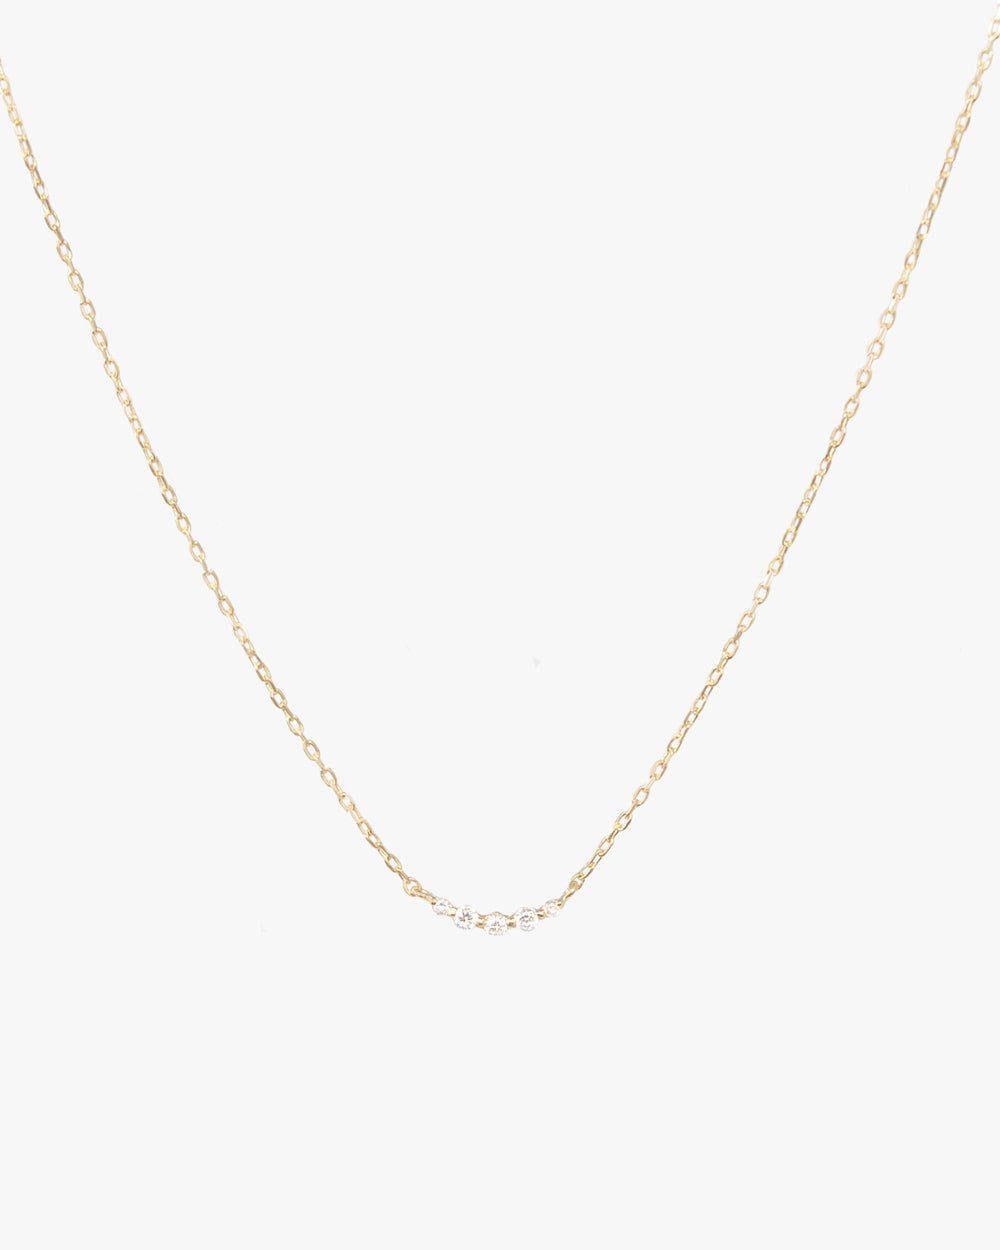 COVE MINI CURVED DIAMOND NECKLACE - Shop Cupcakes and Cashmere